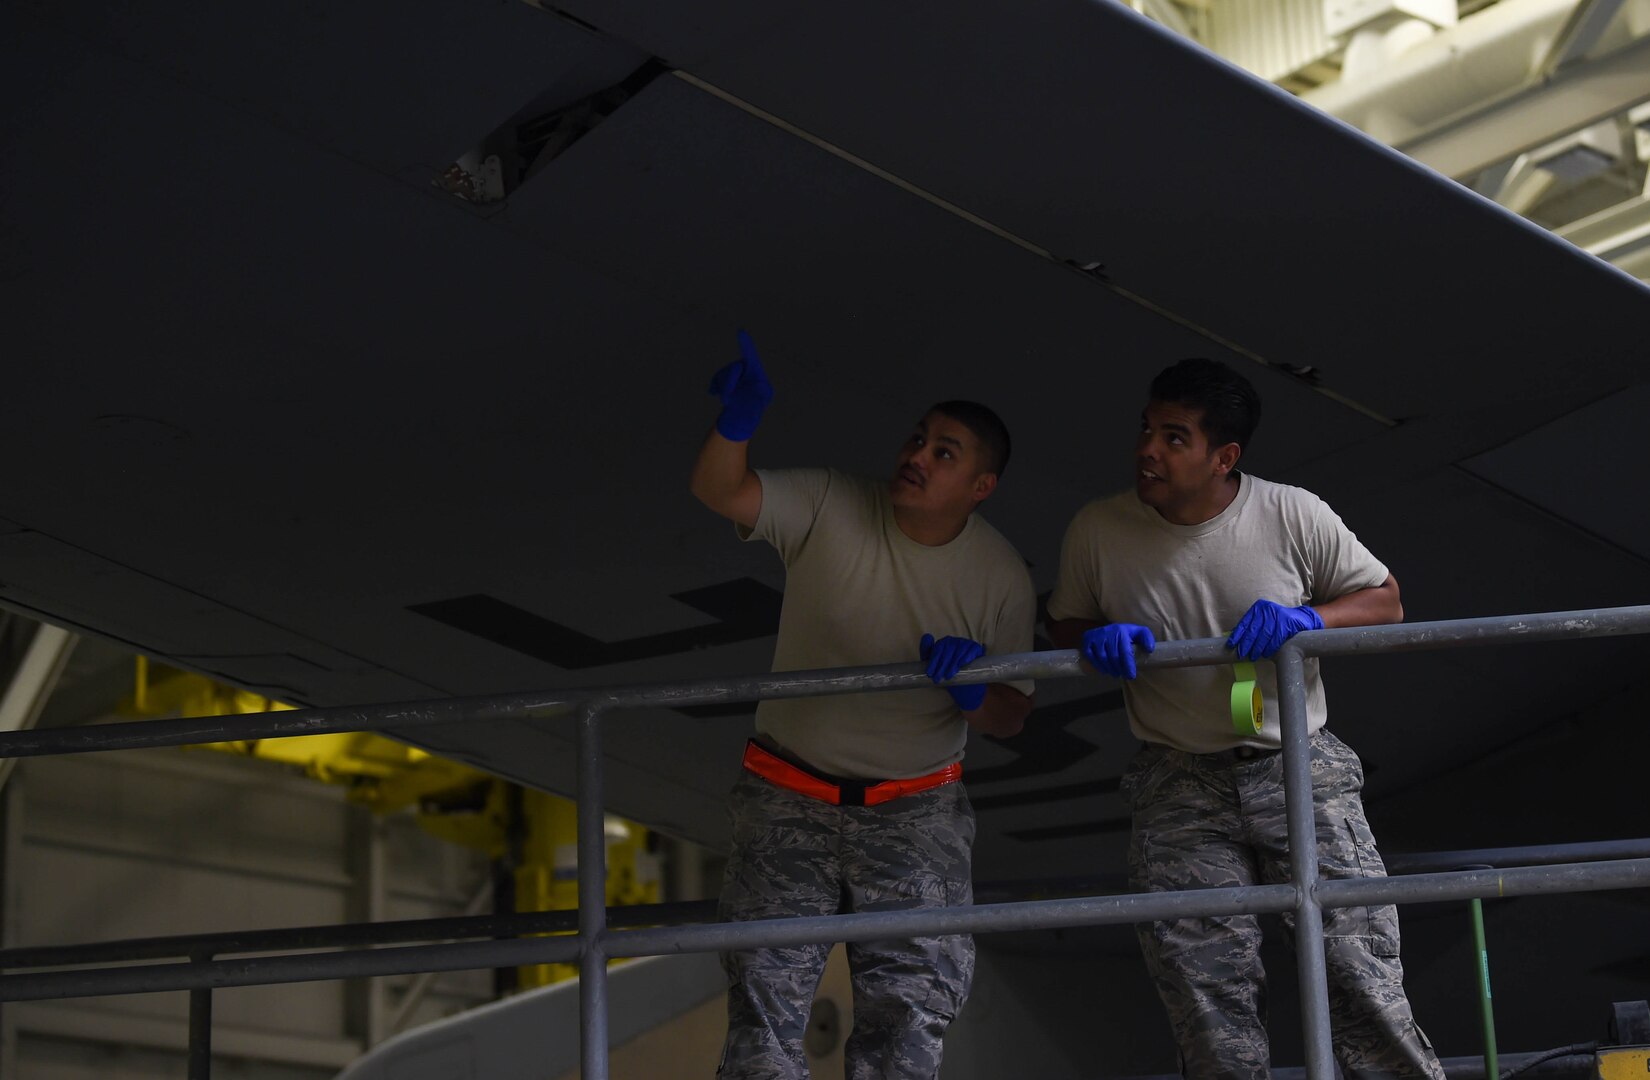 Tech. Sgt. Salvador Ynostraza, left, and Staff Sgt. Adrian Catalan, both 60th Maintenance Squadron aircraft structural maintenance technicians, assess the wing of a C-17 Globemaster III from Travis Air Force Base, Calif., for bare paint spots Aug. 6, 2018, at Joint Base Lewis-McChord, Wash. Ynostraza and Catalan were part of a Travis crew sent to McChord to spray paint their C-17 in McChord’s paint barn.  (U.S. Air Force photo by Senior Airman Tryphena Mayhugh)